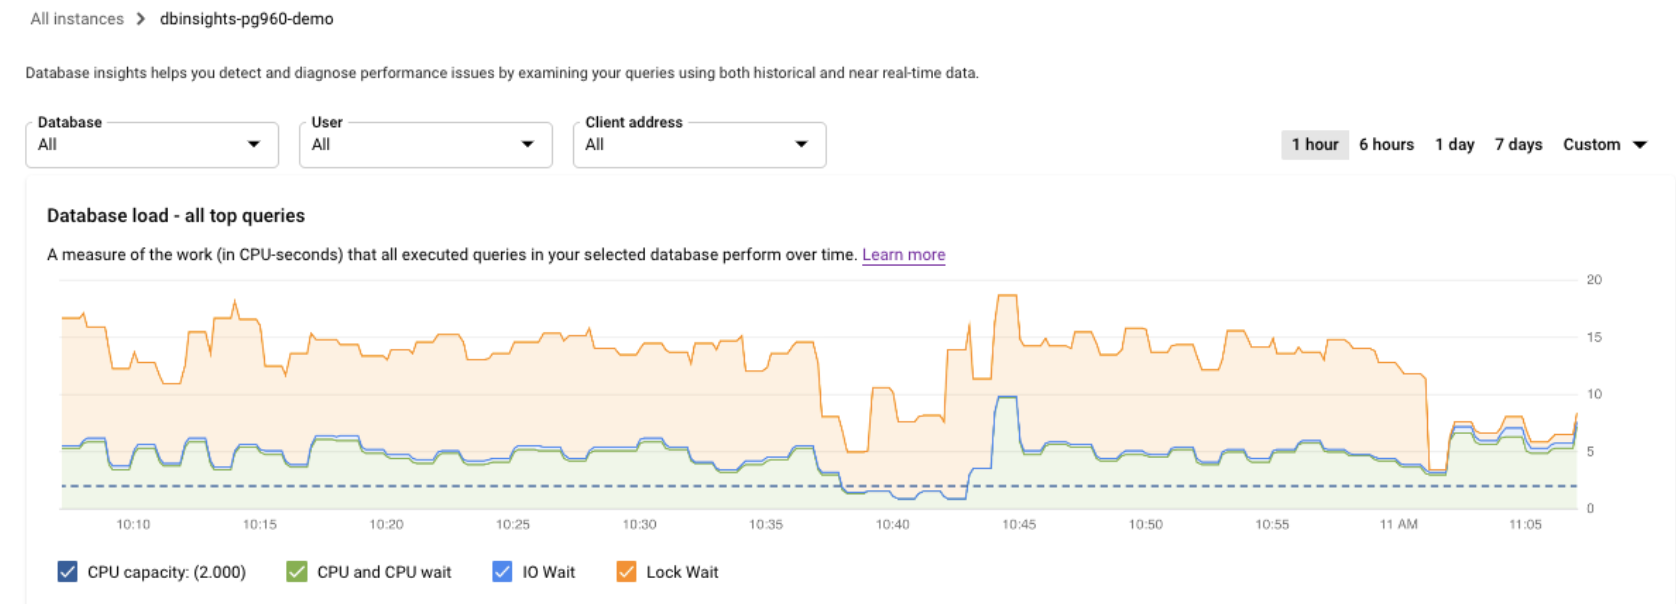 Shows the database load graph with a load for CPU capacity, CPU and
         CPU wait, IO Wait, and Lock Wait.